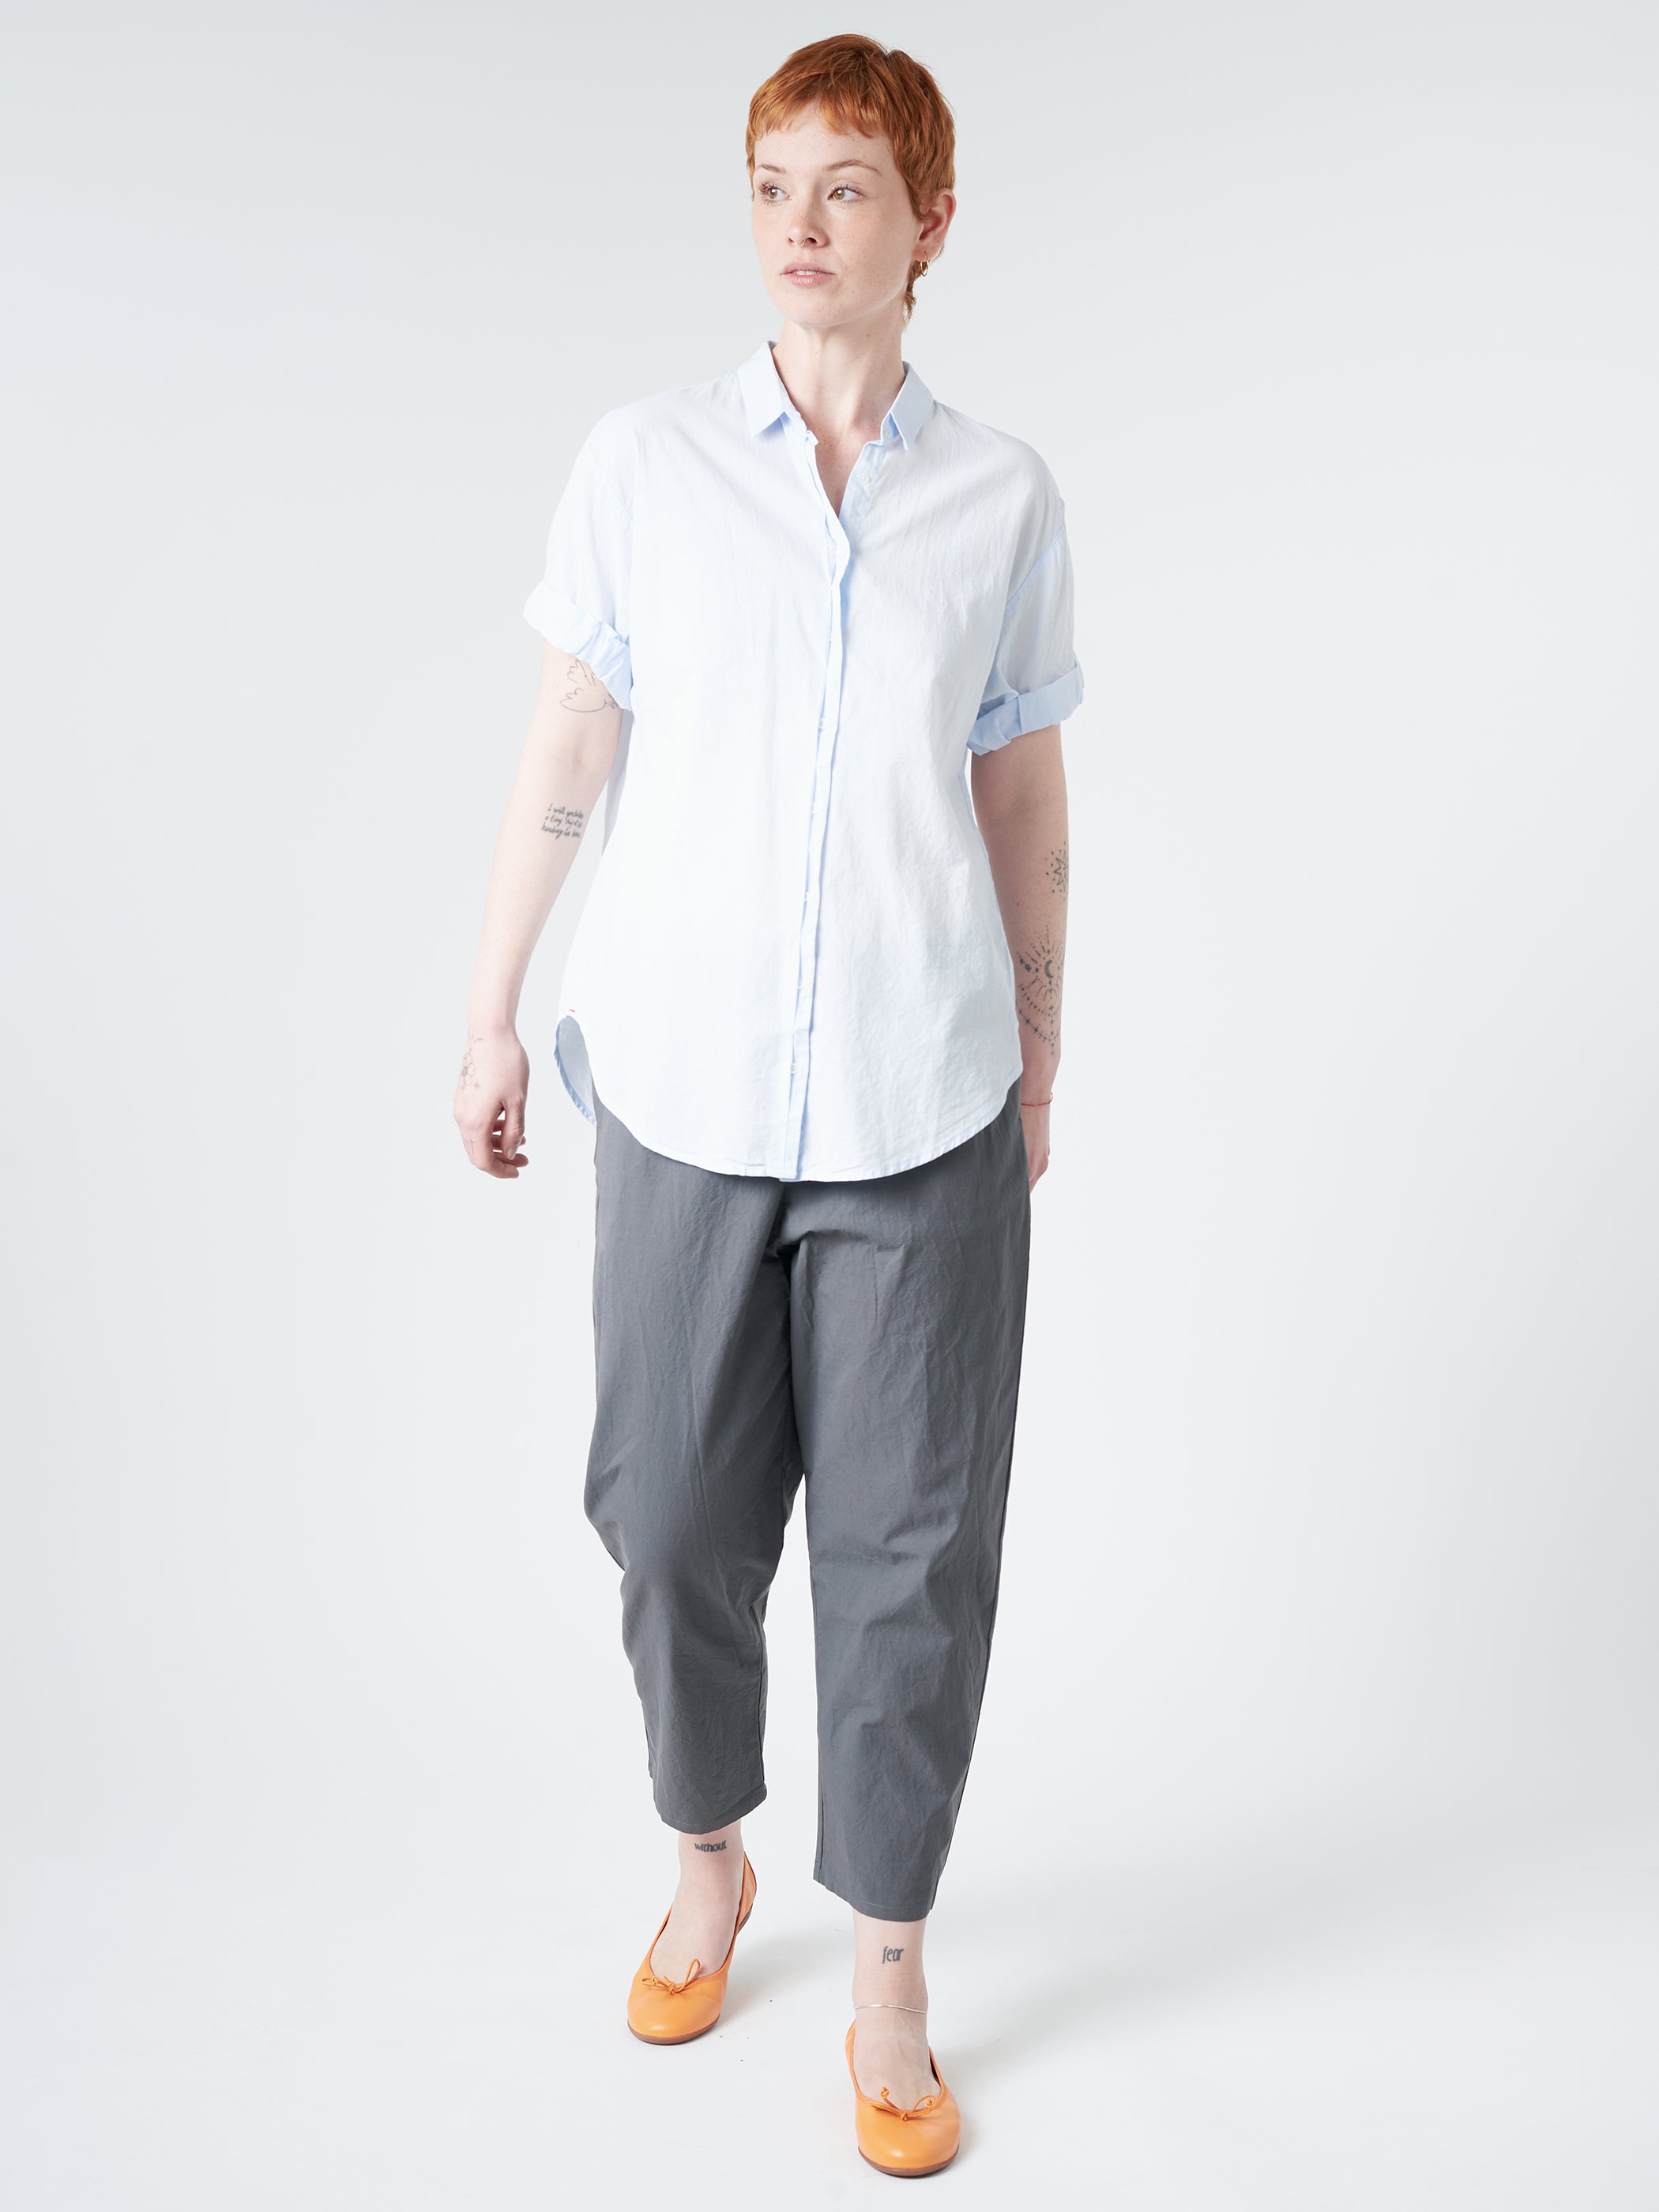 P645 Trousers